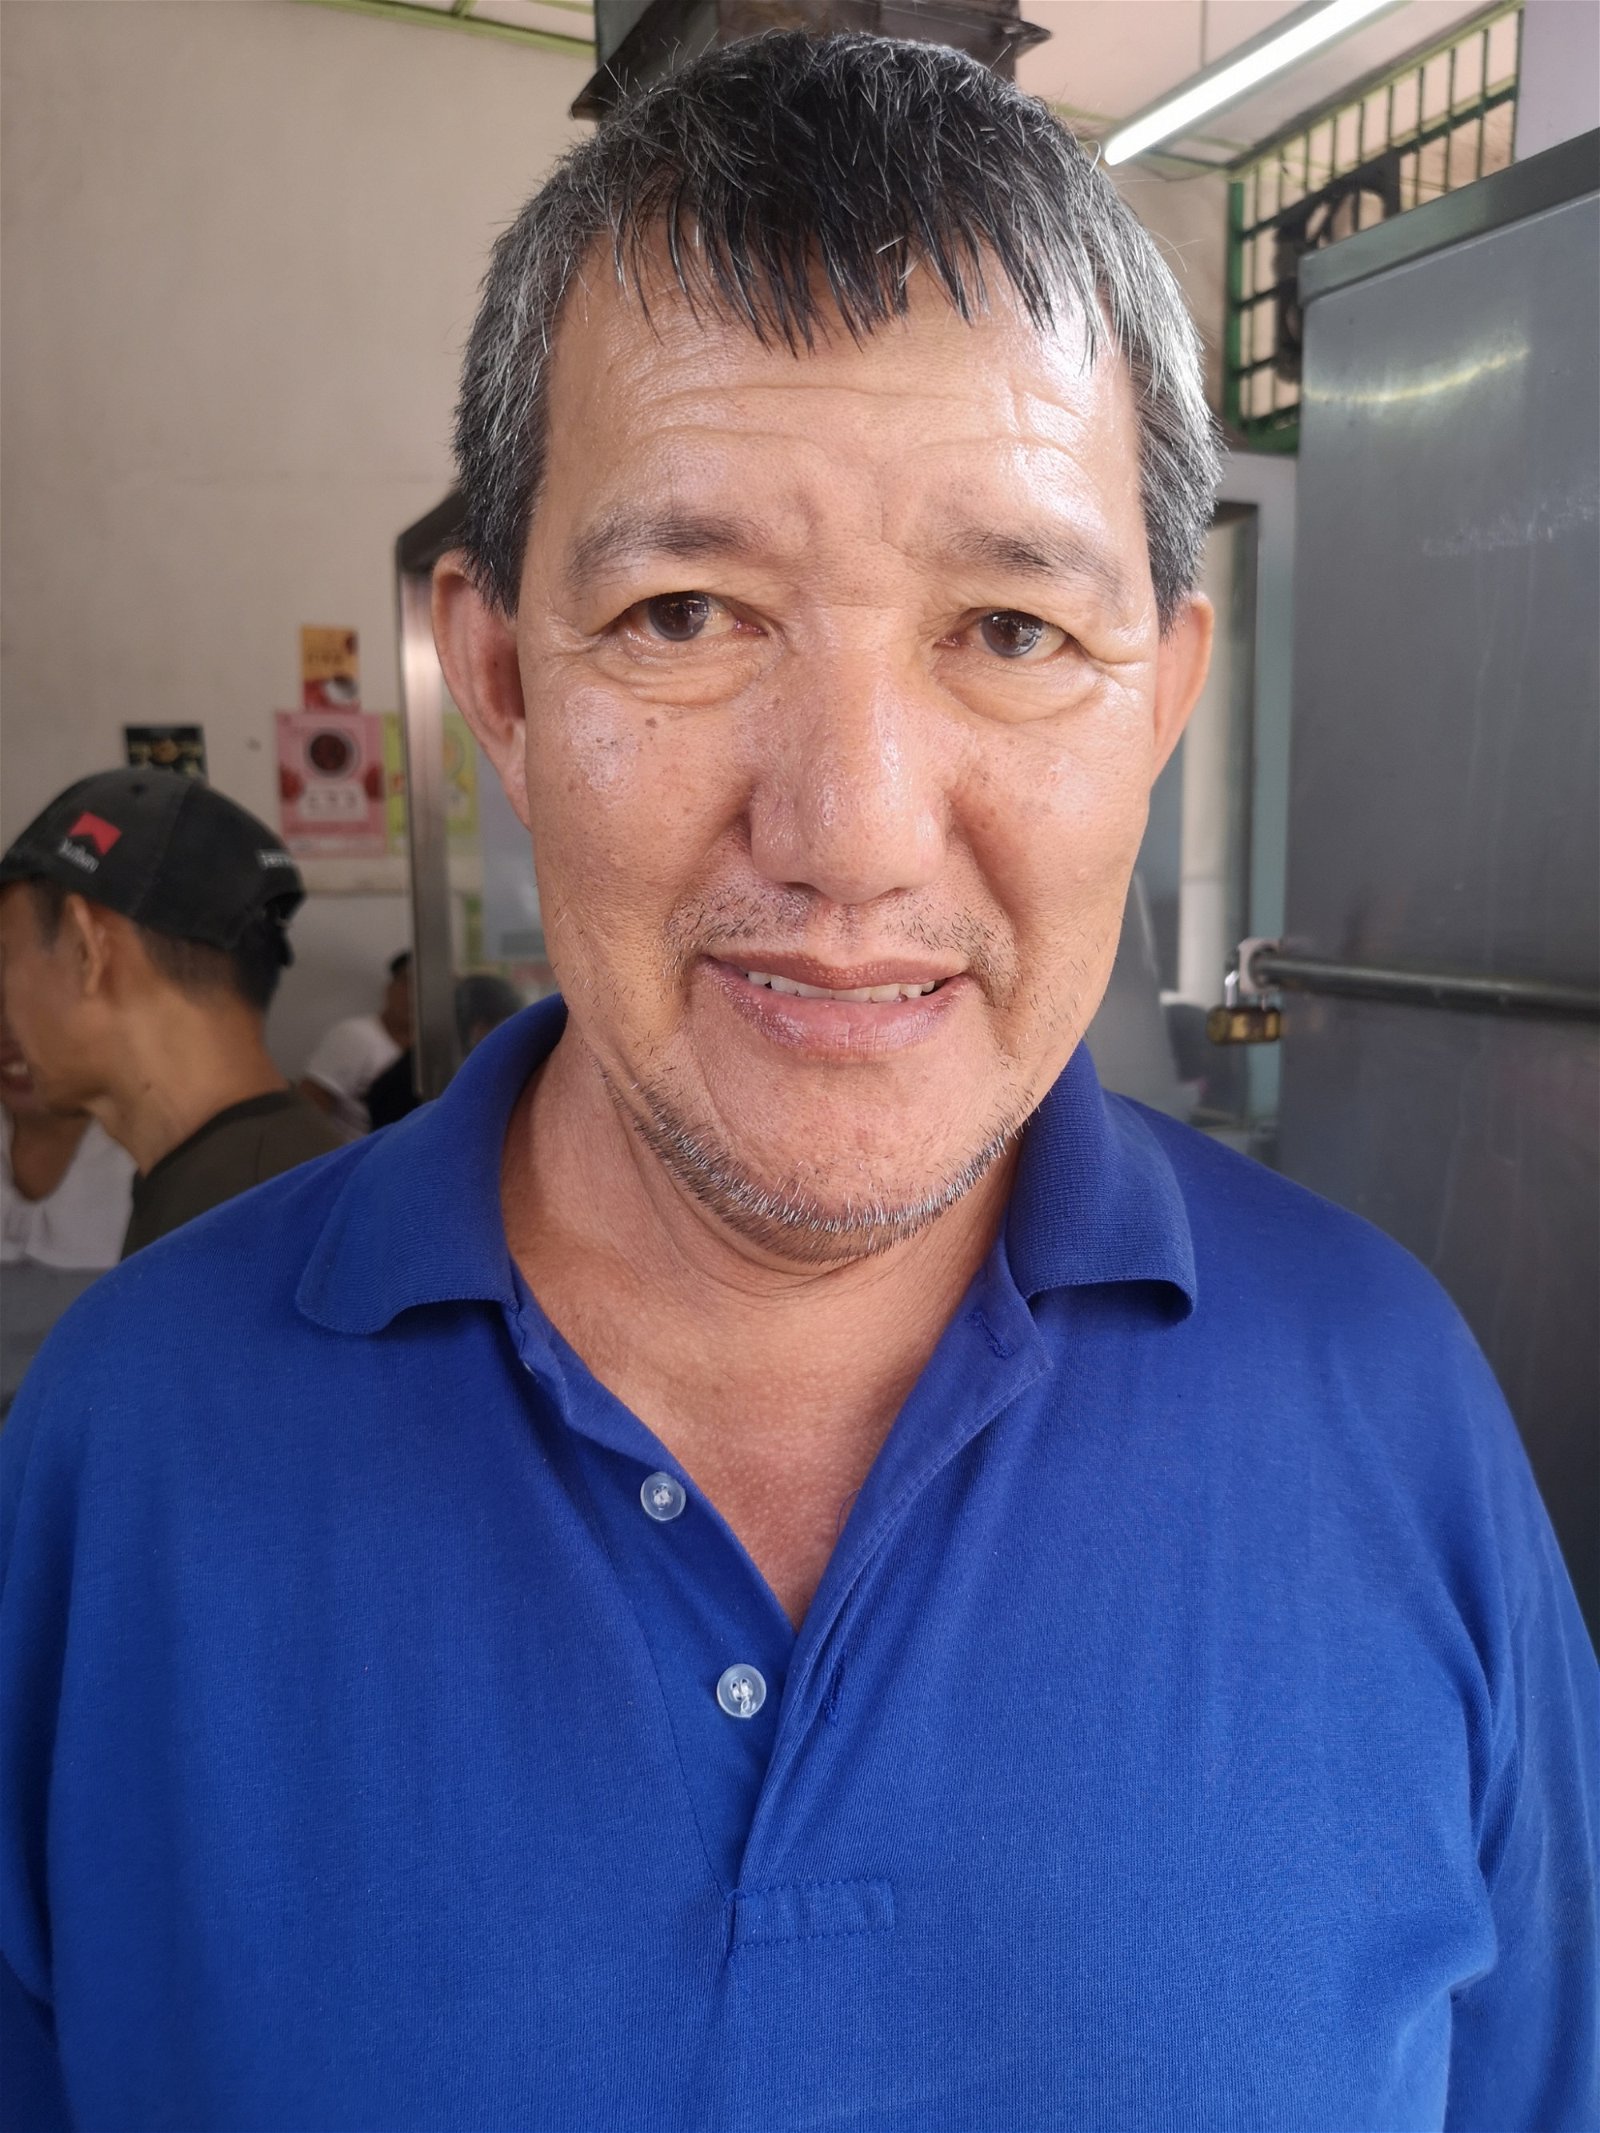 Mr. Lim kept the traditional Char Kuey Teow by continuing to serve blood cockle in the dish, even at higher cost, however, he will not accept the customer’s request for extra serving of cockle